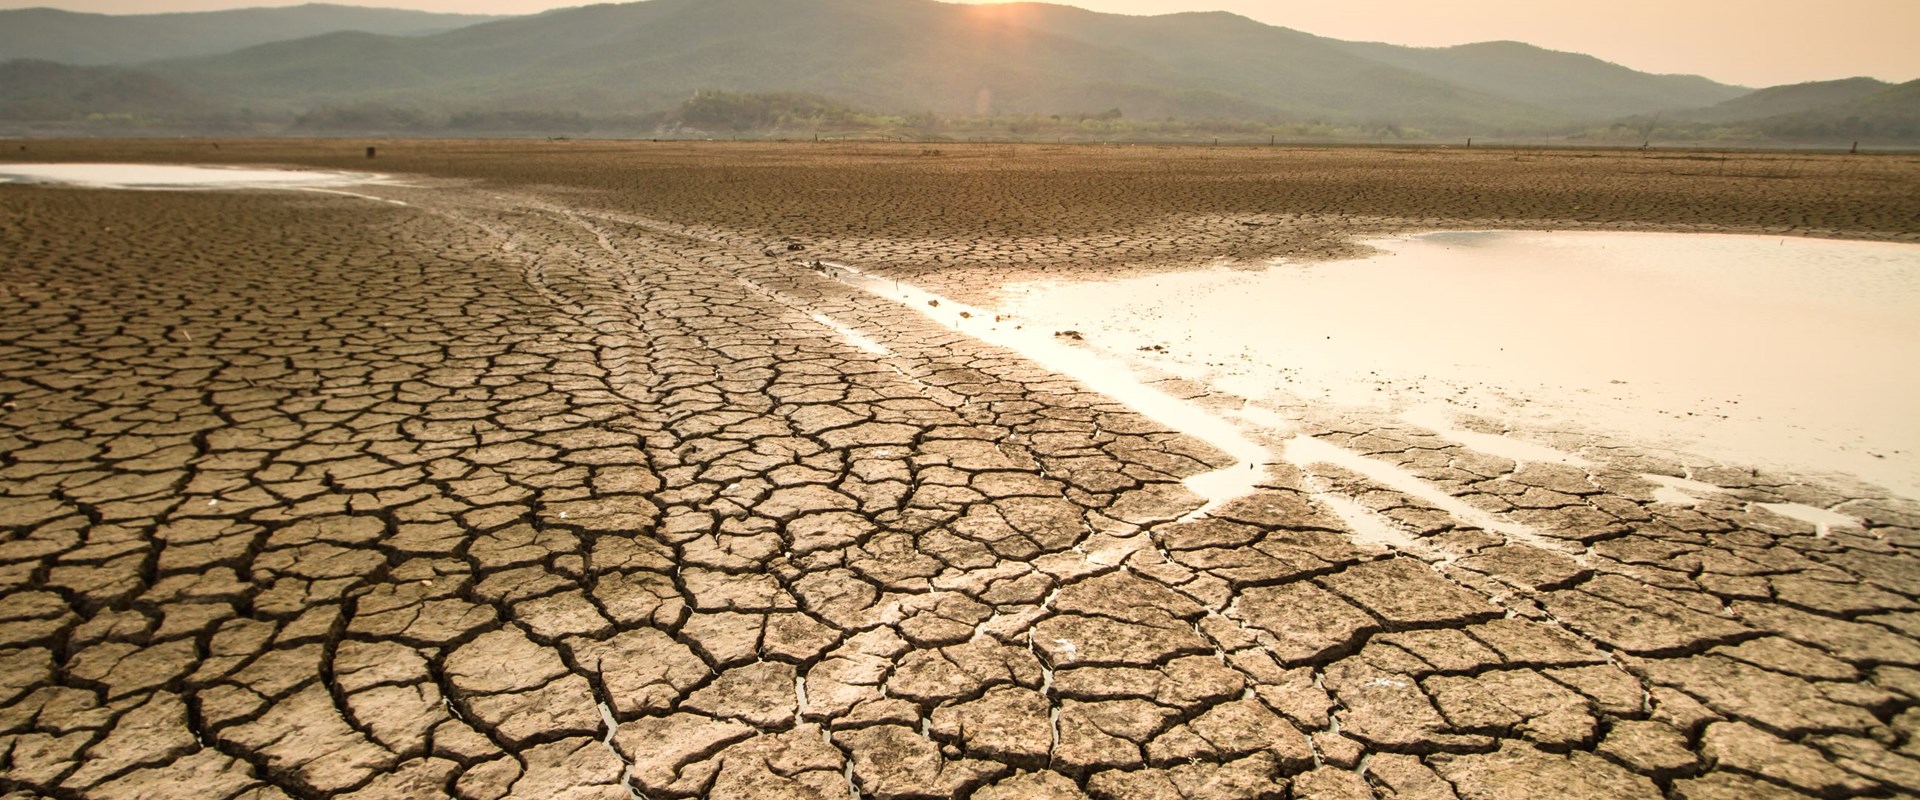 An image of dry land showing cracked earth and drought